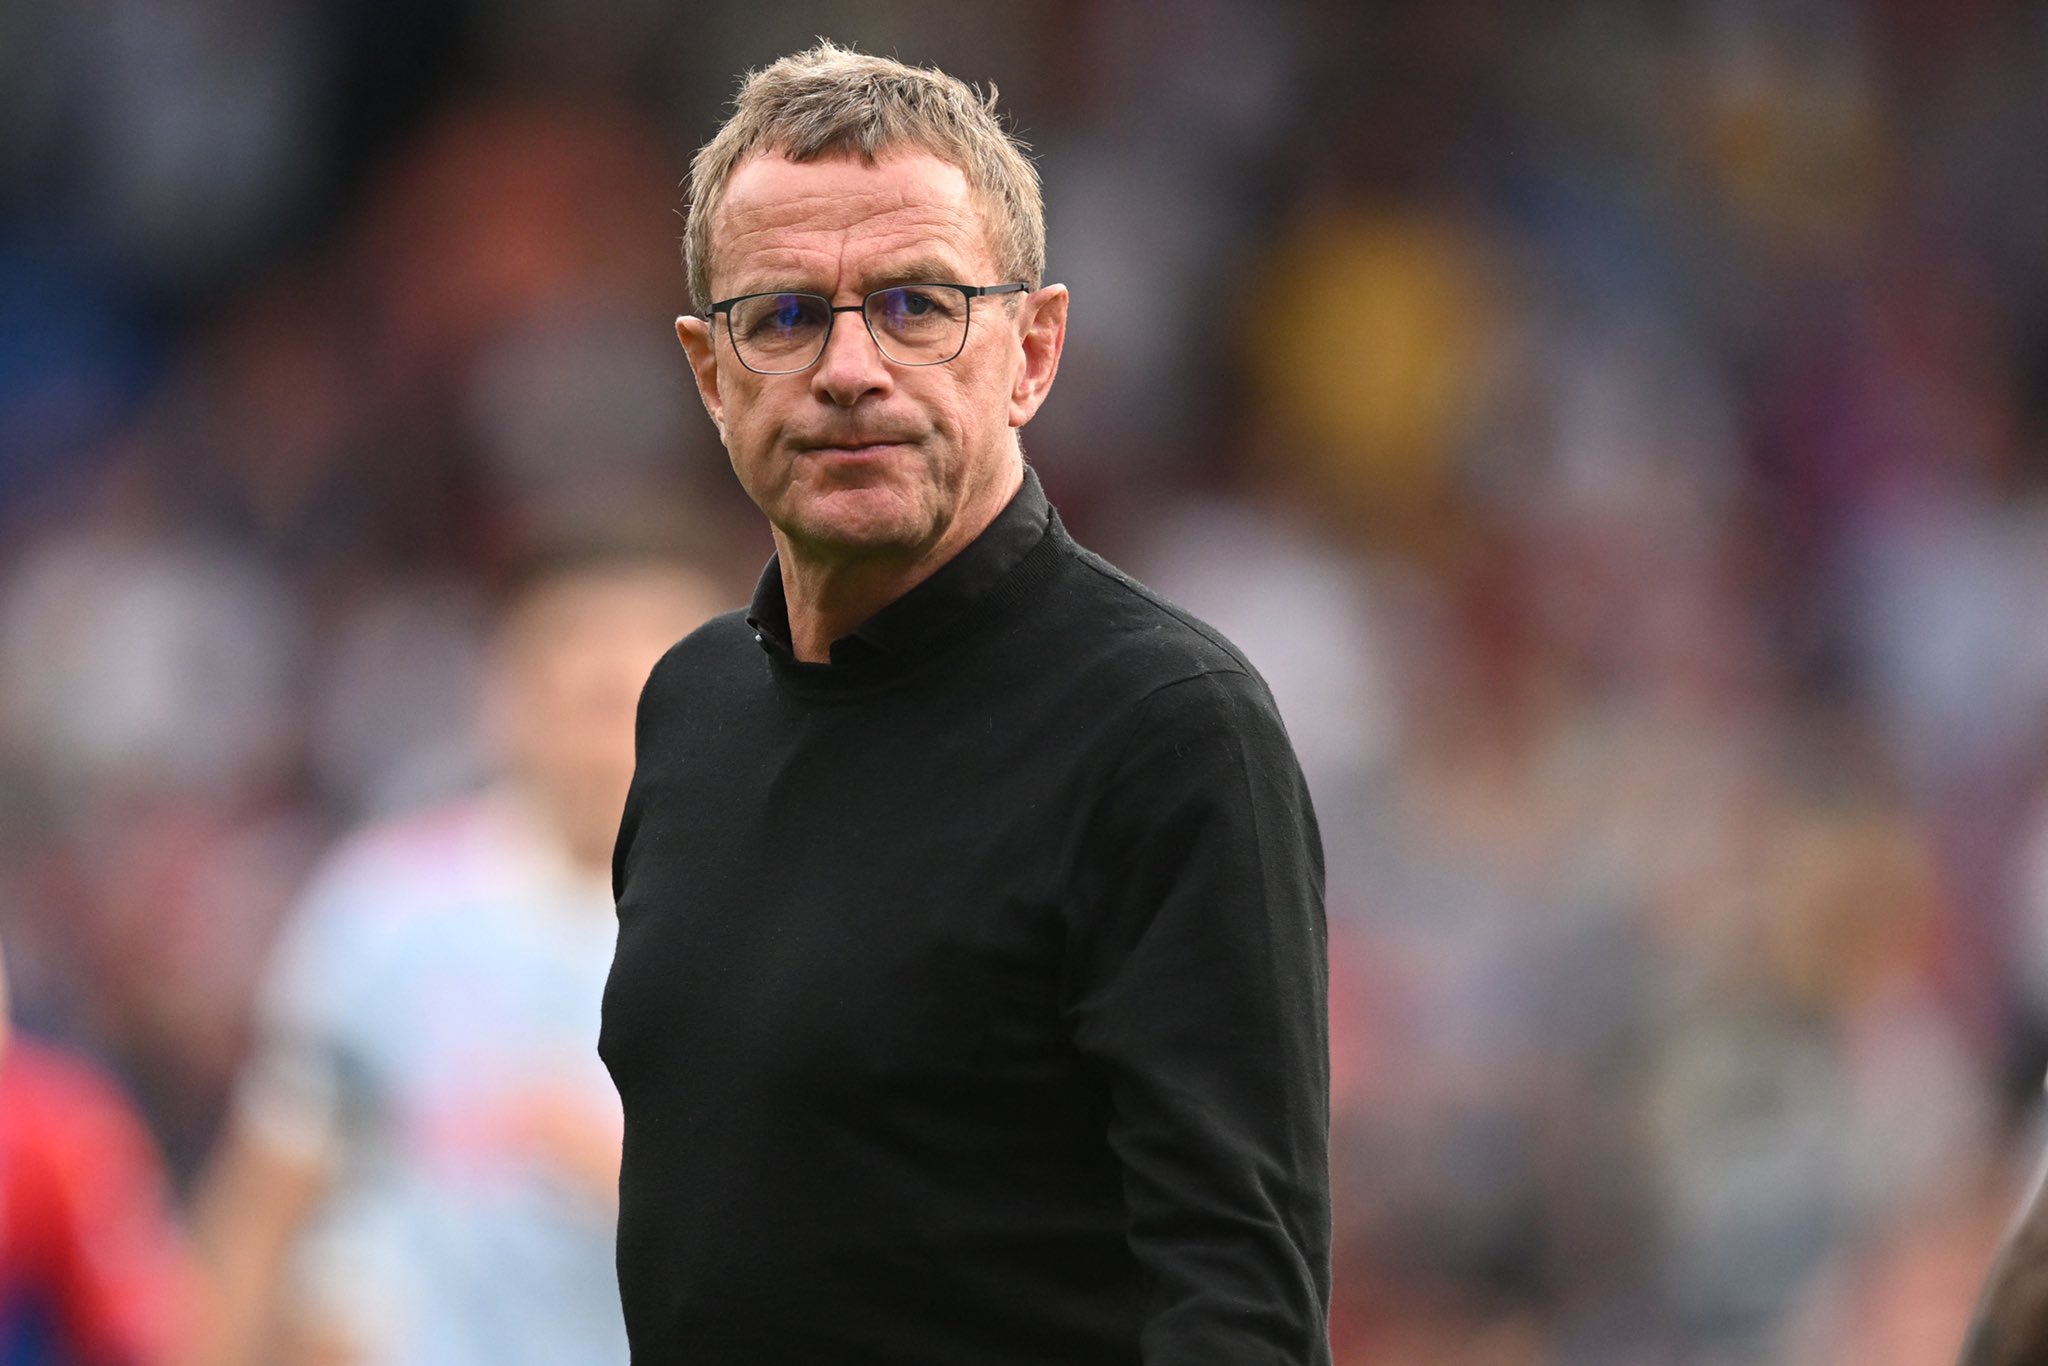 Ralf Rangnick's Manchester United exit